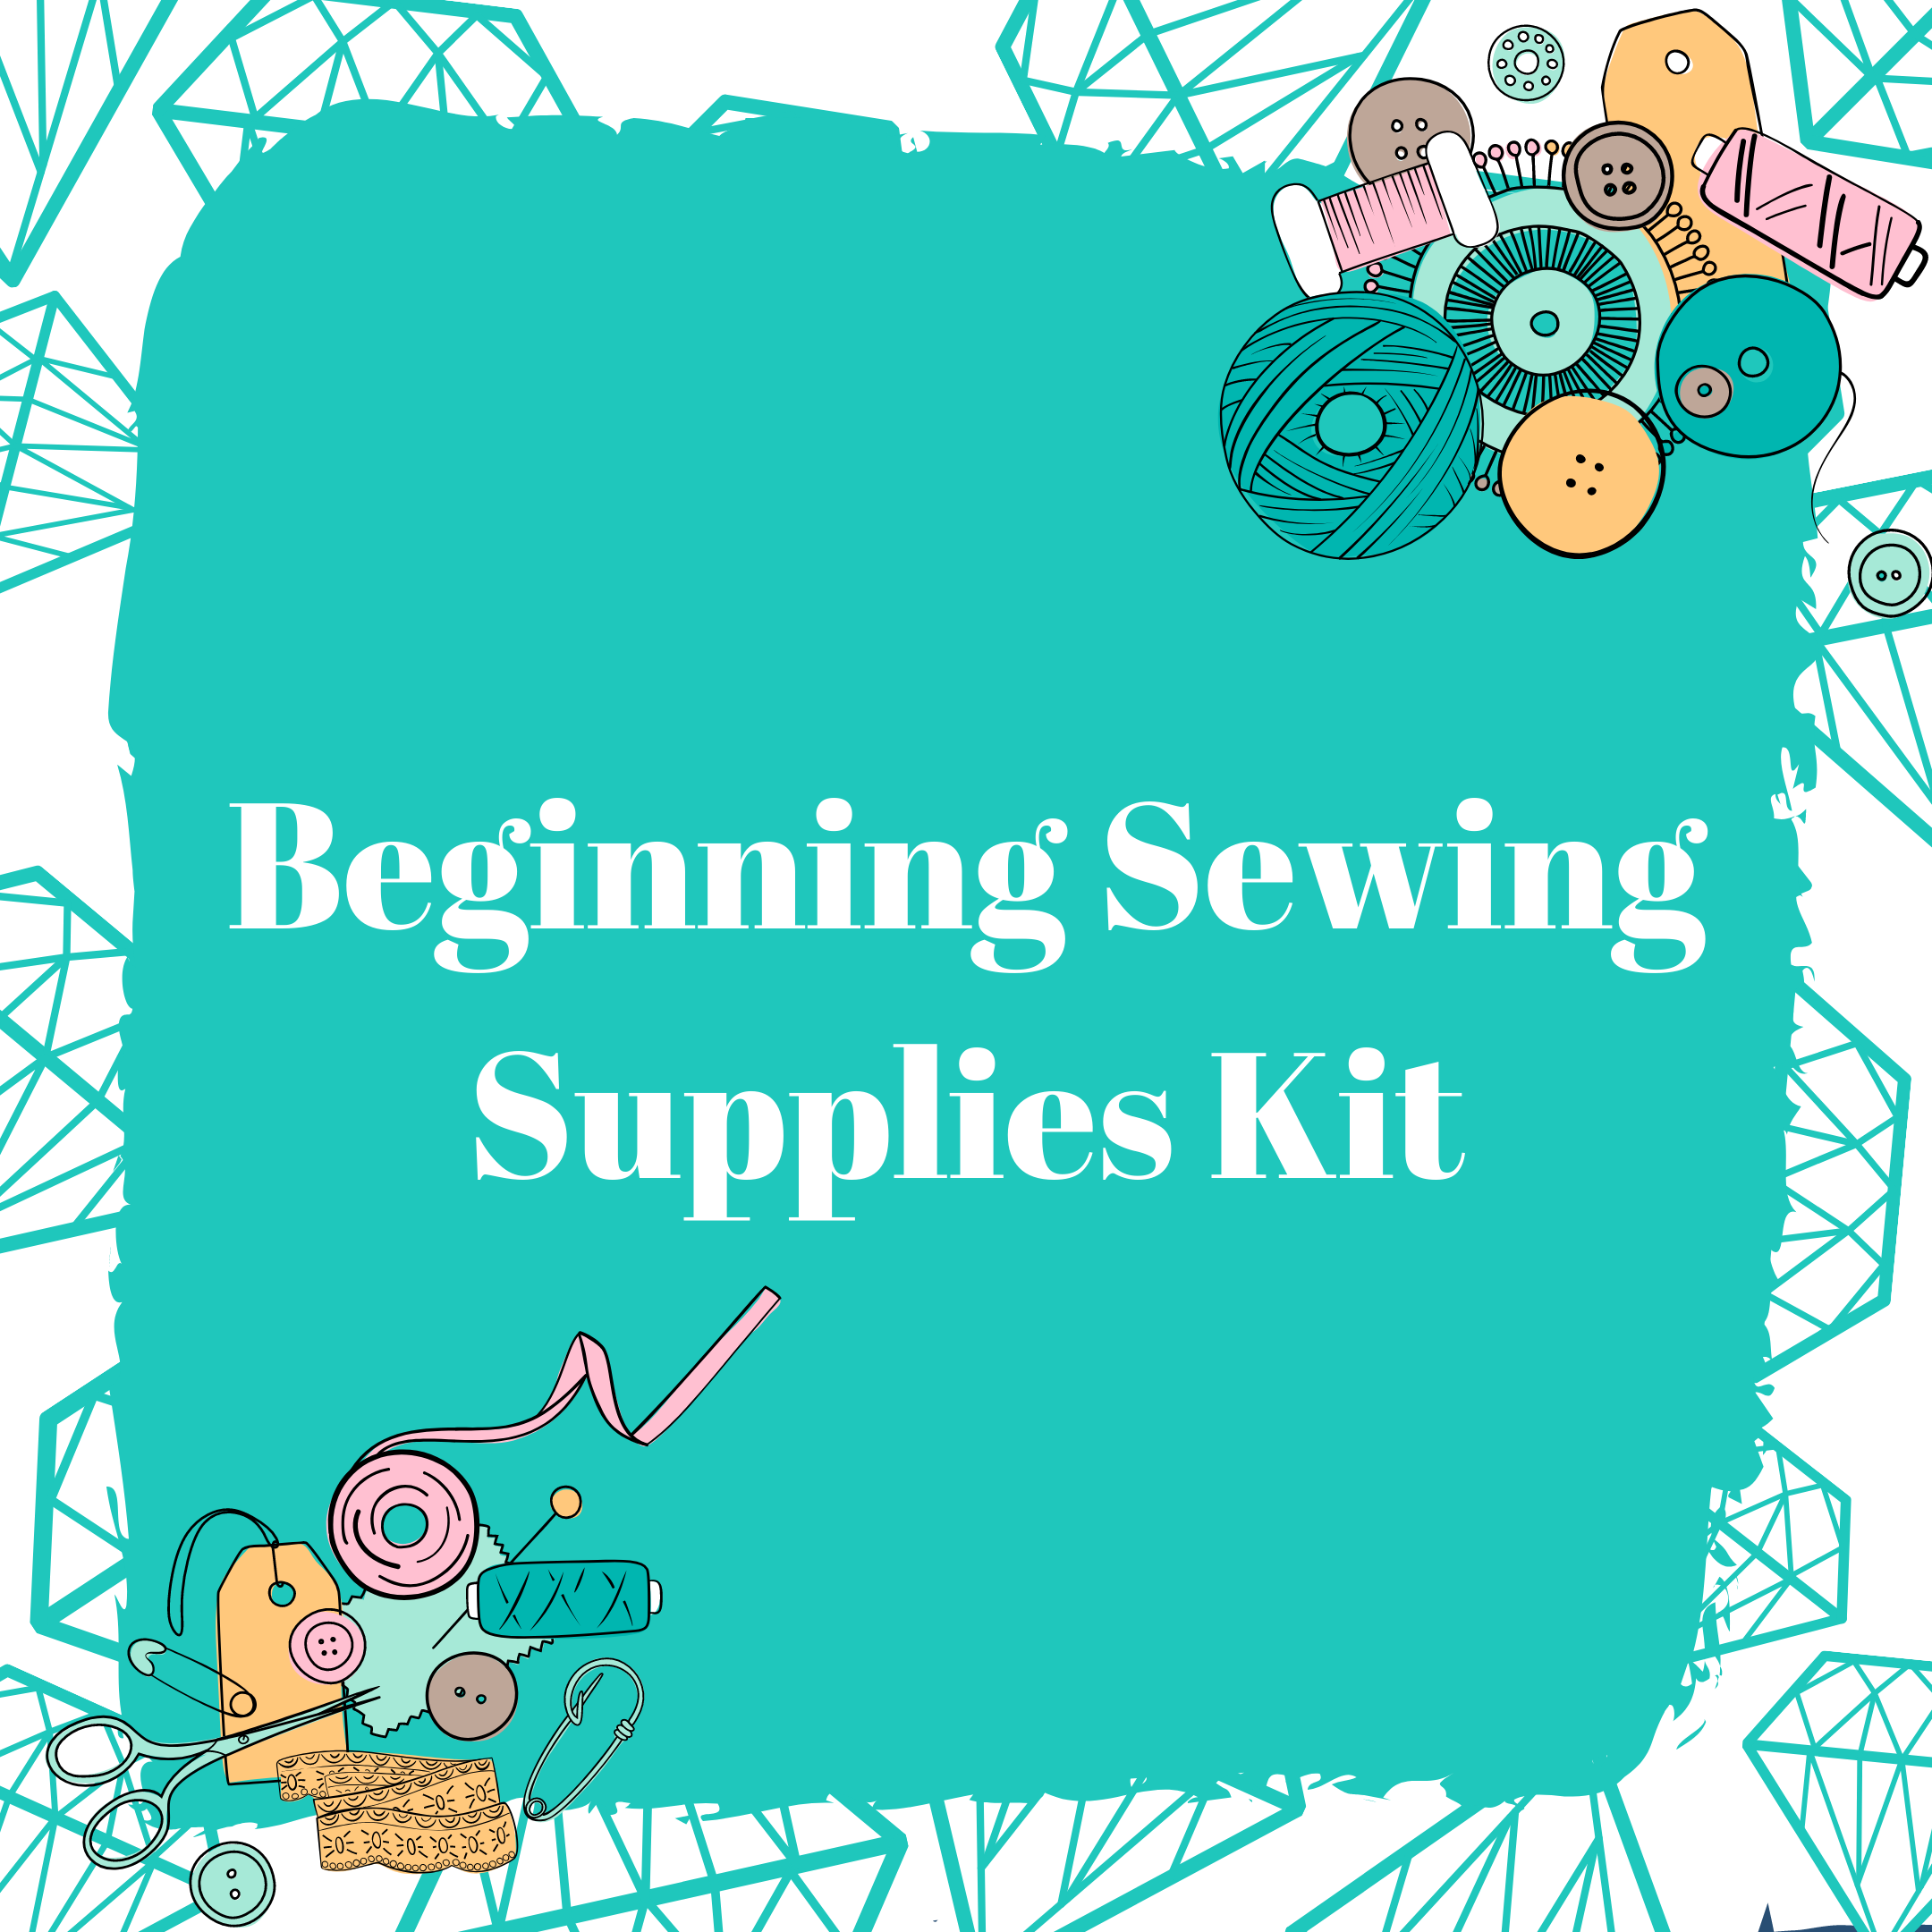 Best Sewing Kits for Pros and Beginners Alike –